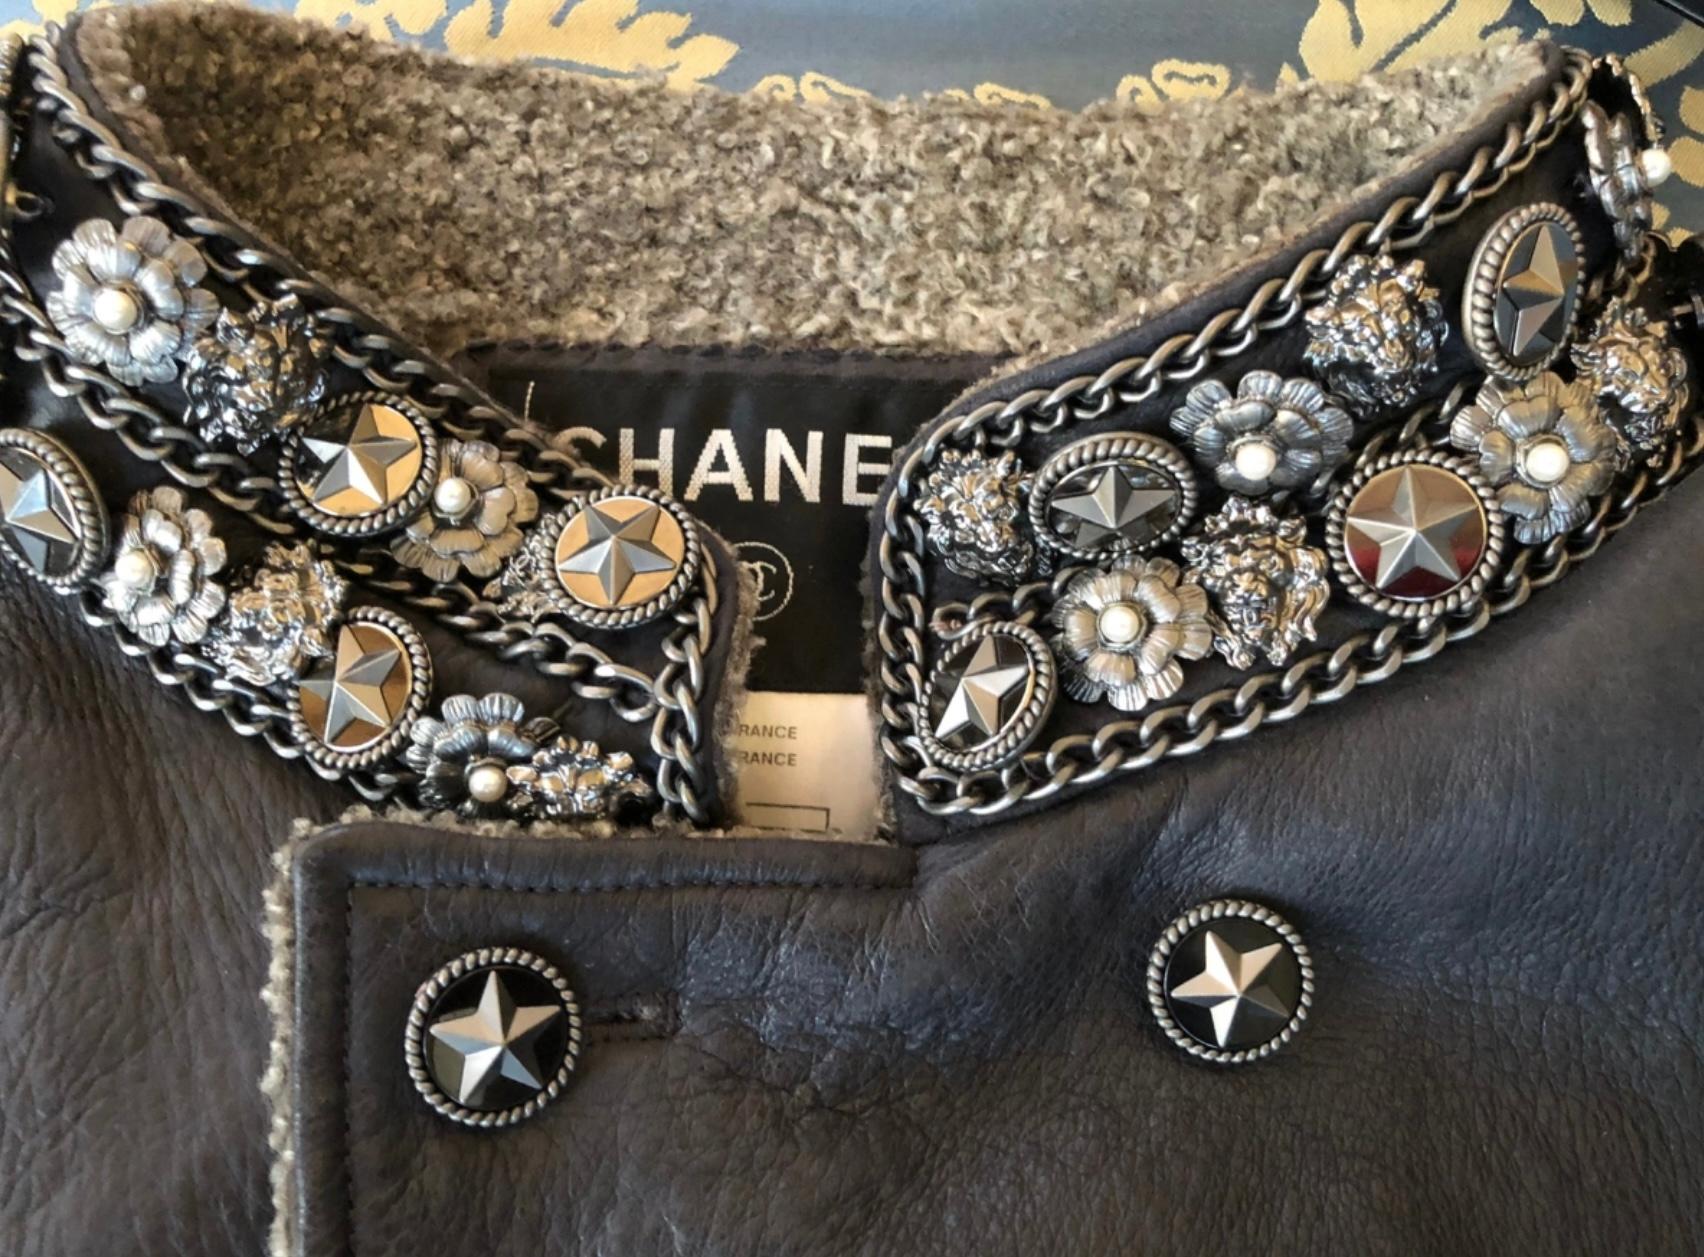 Boutique pirce over 14,000€
Collectors Chanel black shearling jacket with stunning jewel embellishment: Camellias, lionhead: symbols of the house Chanel.
- signature metallic chain trim throughout
Size mark 38 FR. Condition is pristine.